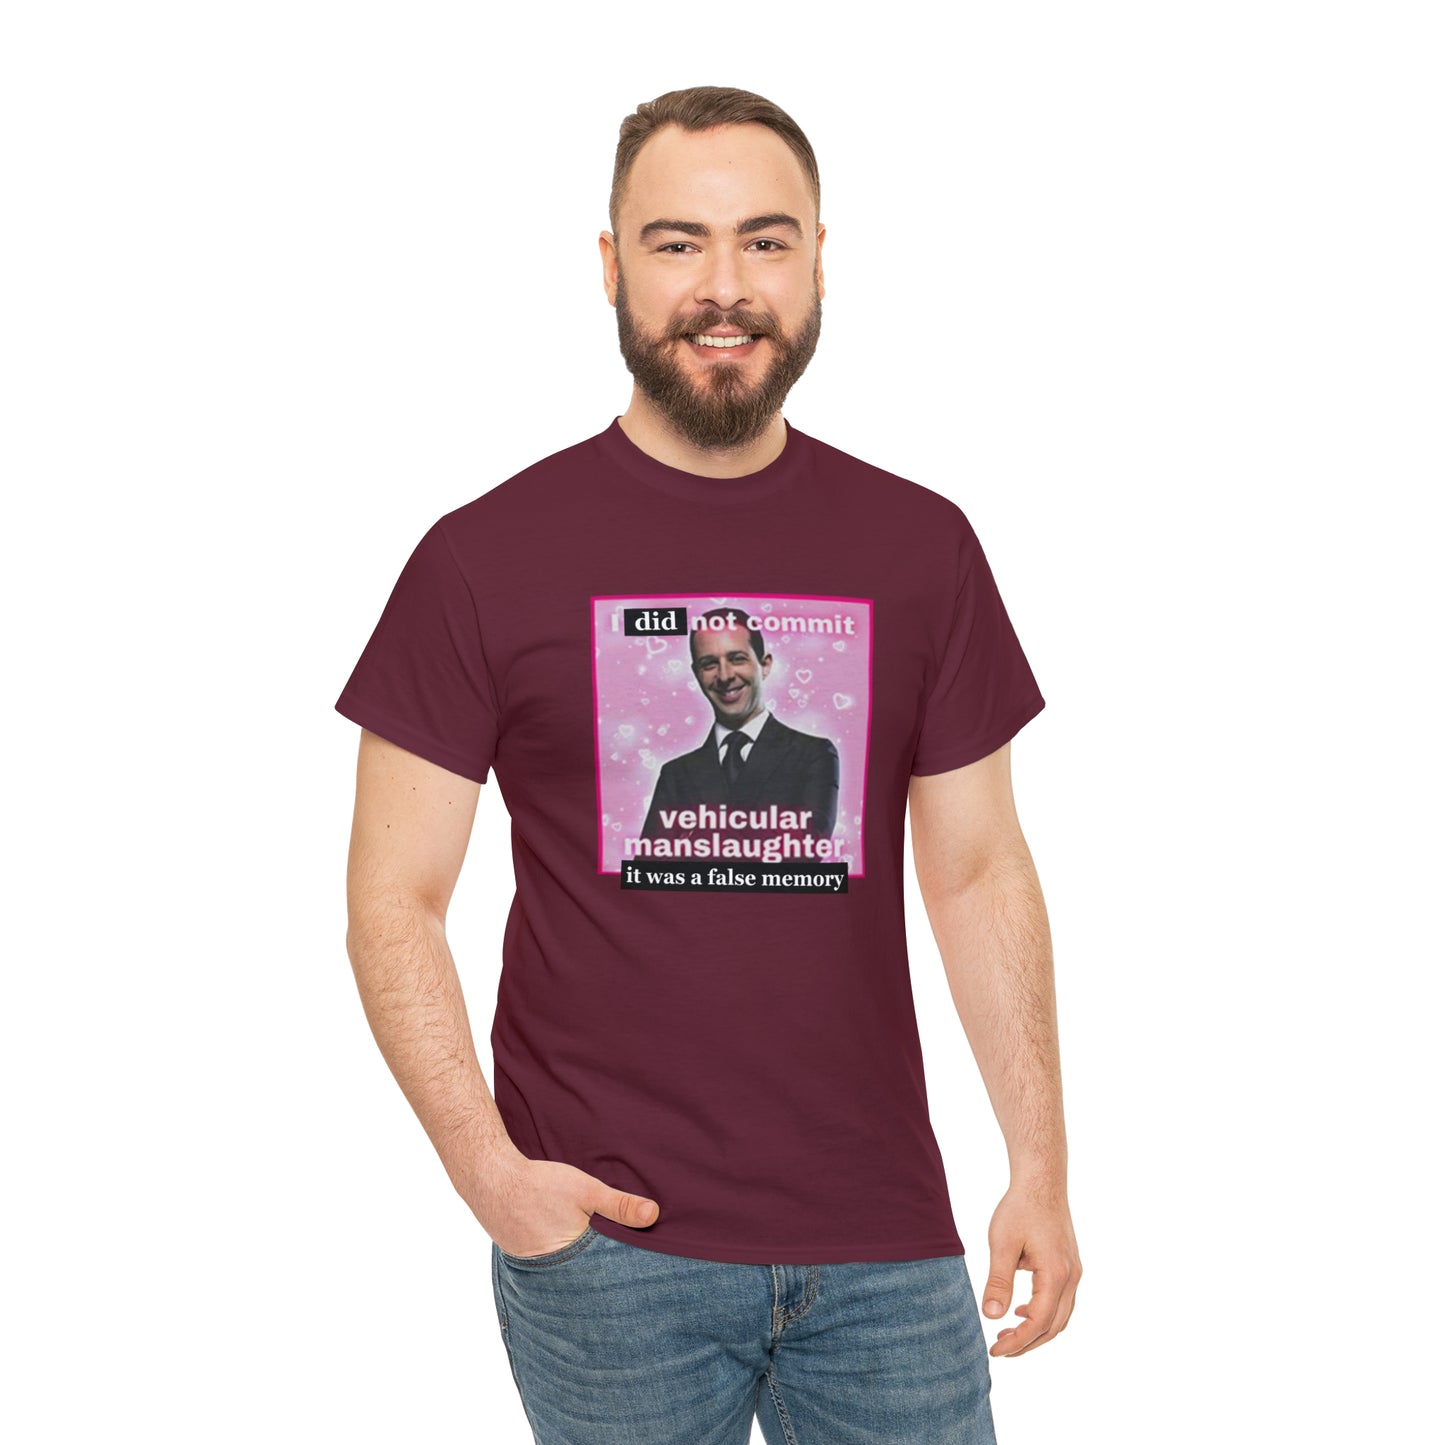 I did not commit vehicular manslaughter it was a false memory kendall roy - Unisex Heavy Cotton Tee